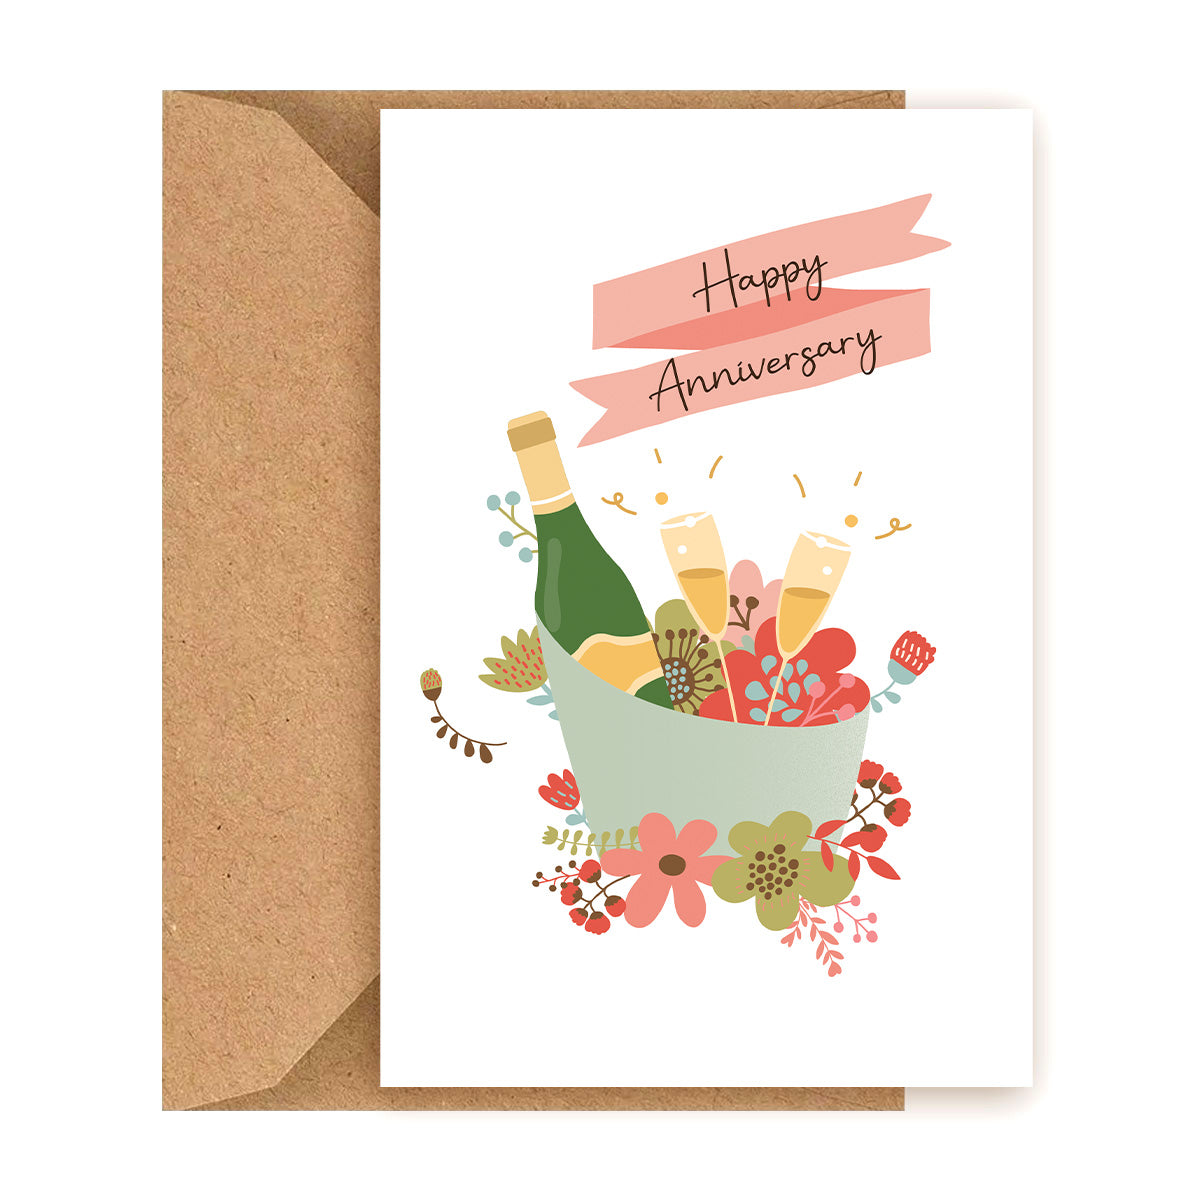 Happy Anniversary Card, card for special occasions, card to send anniversary wishes, greeting card 